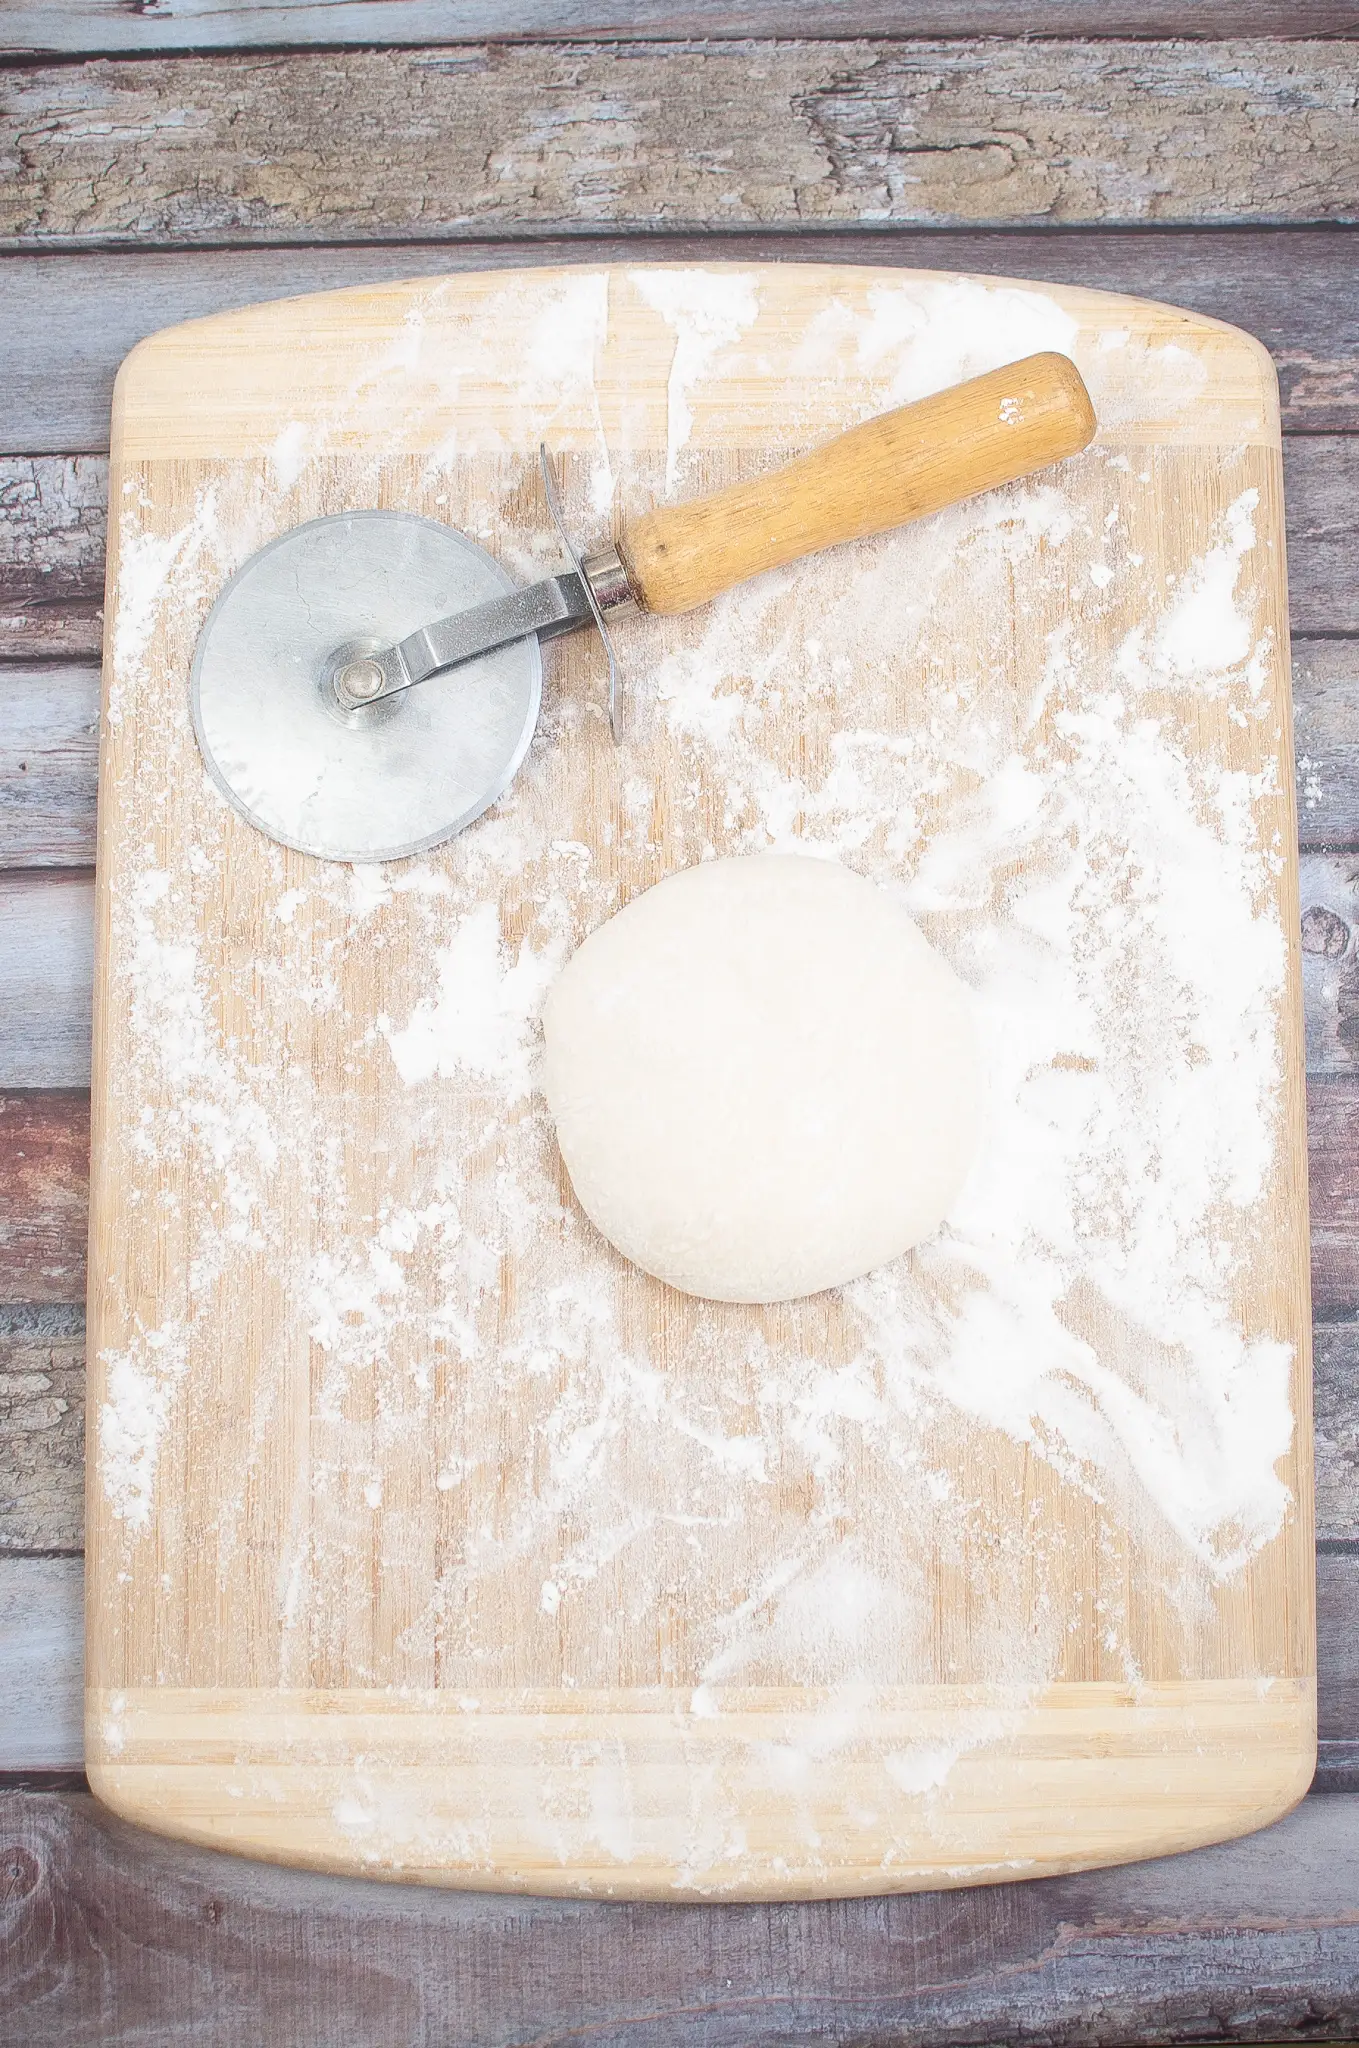 unformed pizza dough on a cutting board. 